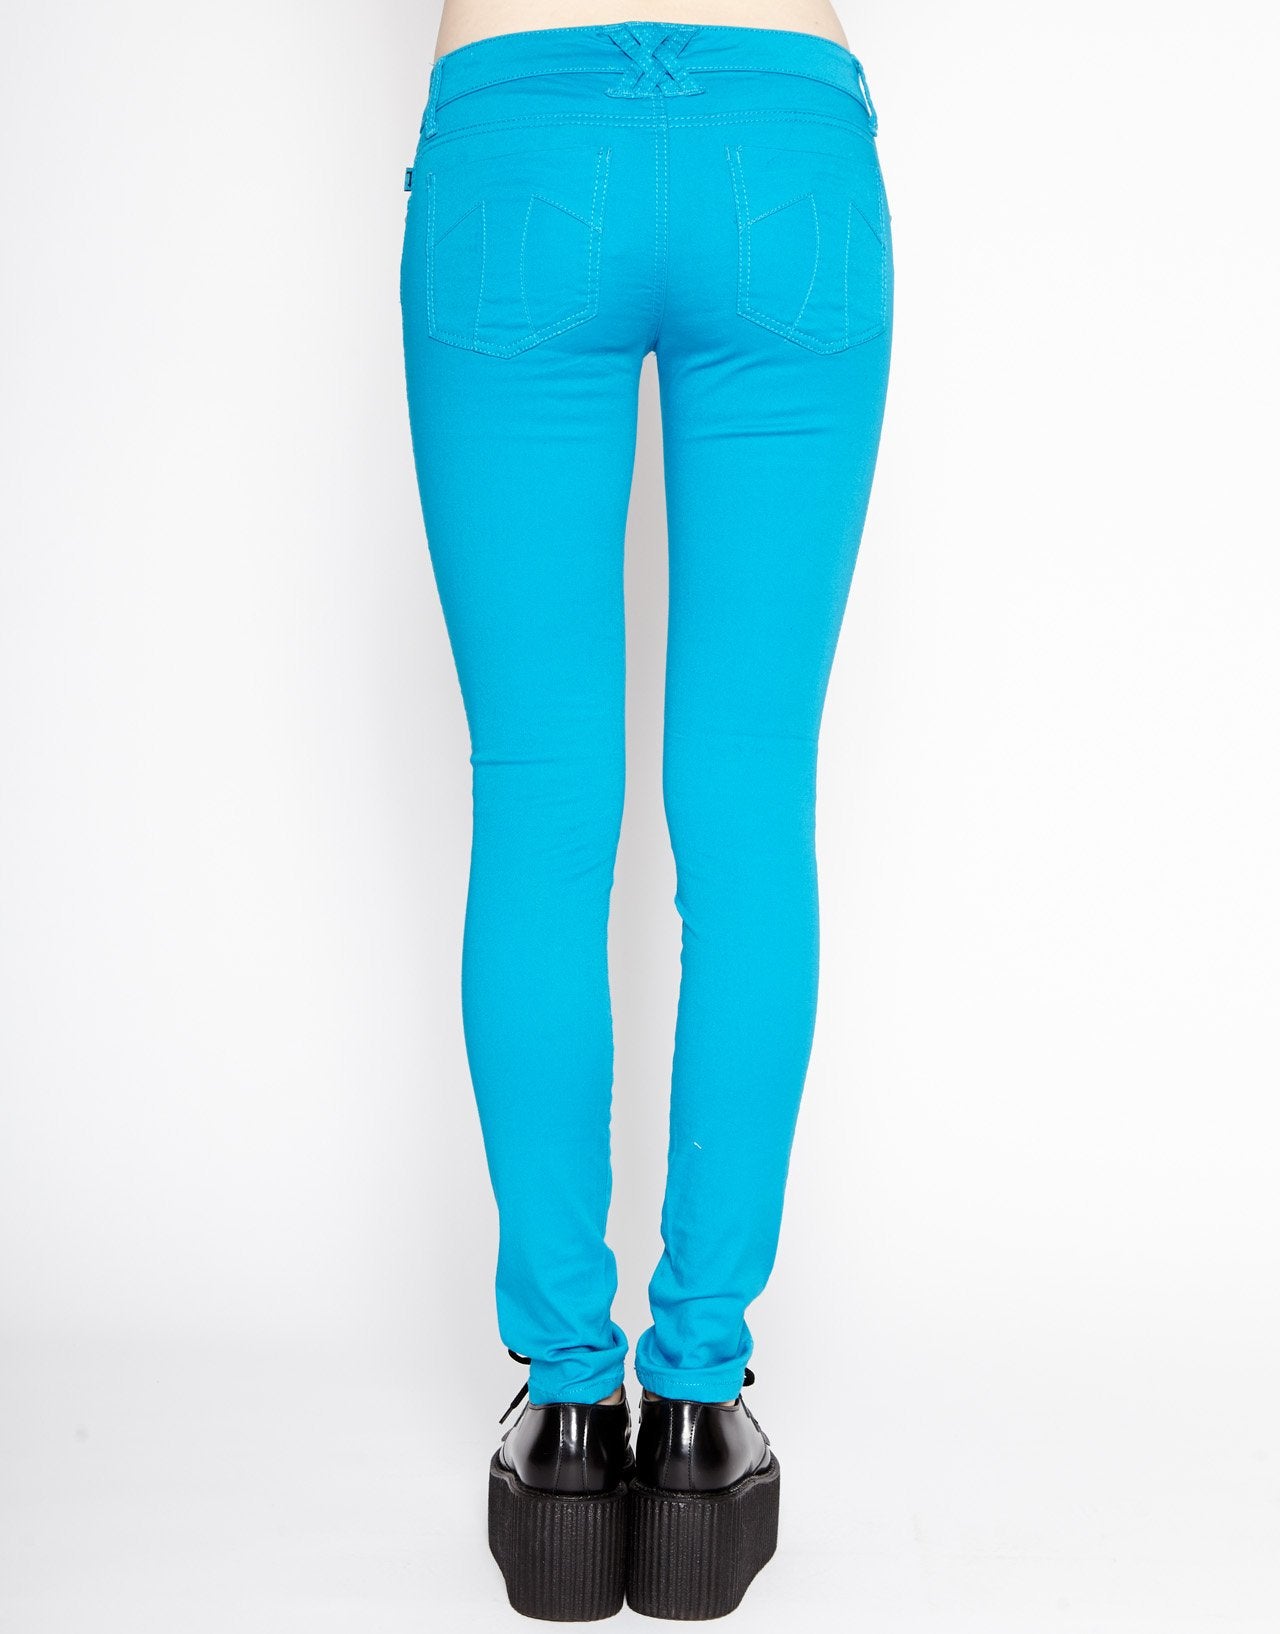 T BACK JEAN TURQUOISE